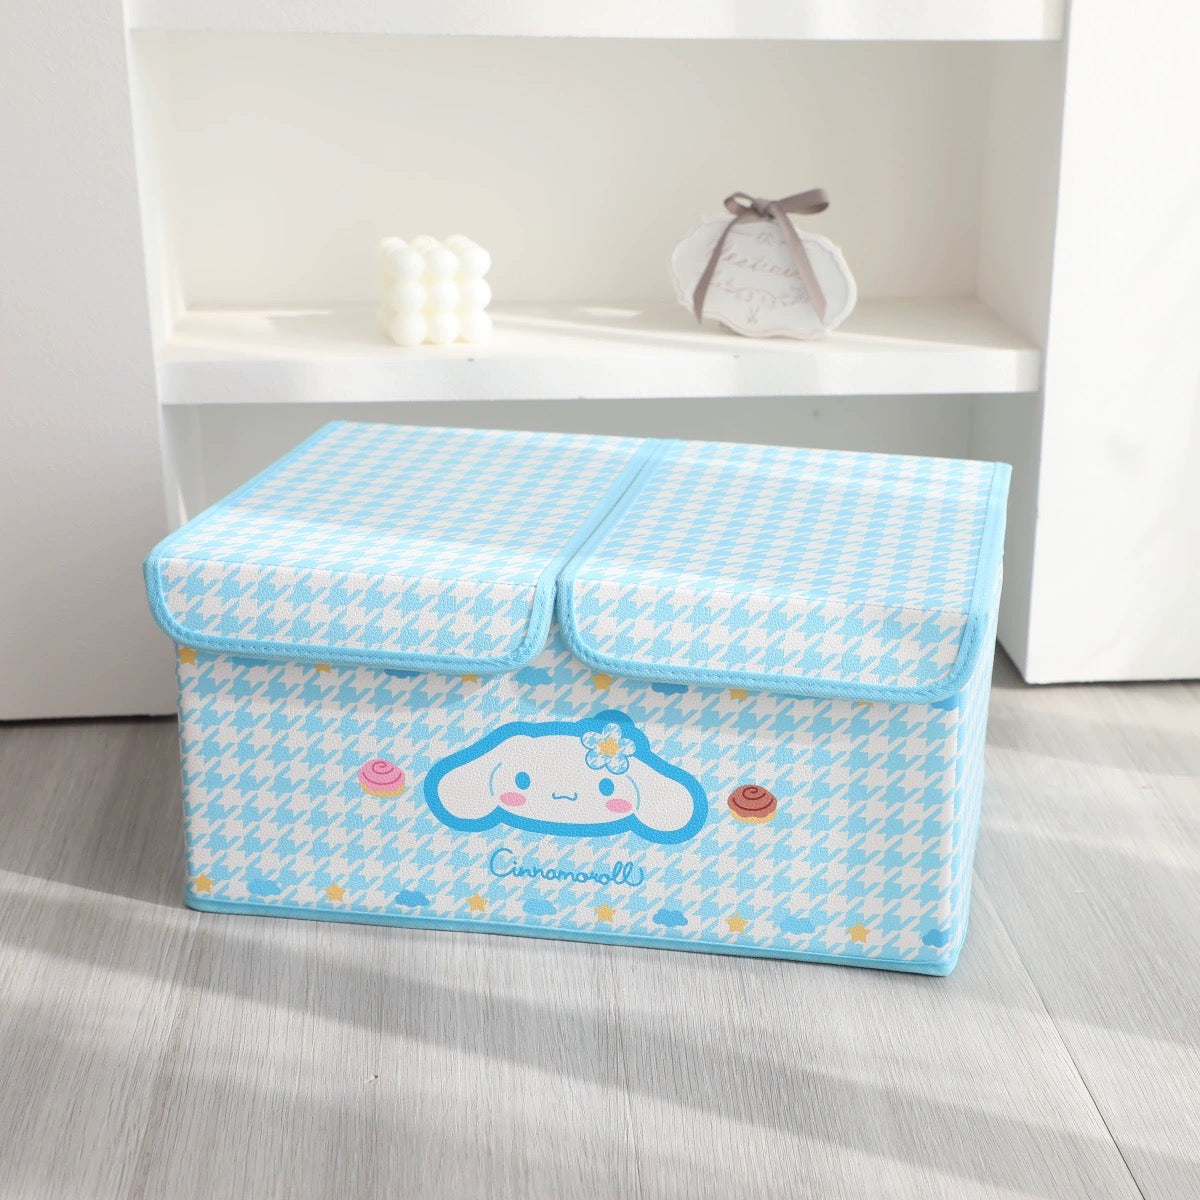 Sanrio 2 Covers Vintage Colourful Storage Box with Cover | Hello Kitty My Melody Kuromi Cinnamoroll Pompompurin Pochacco Hangyodon - Bedroom Girl Gift